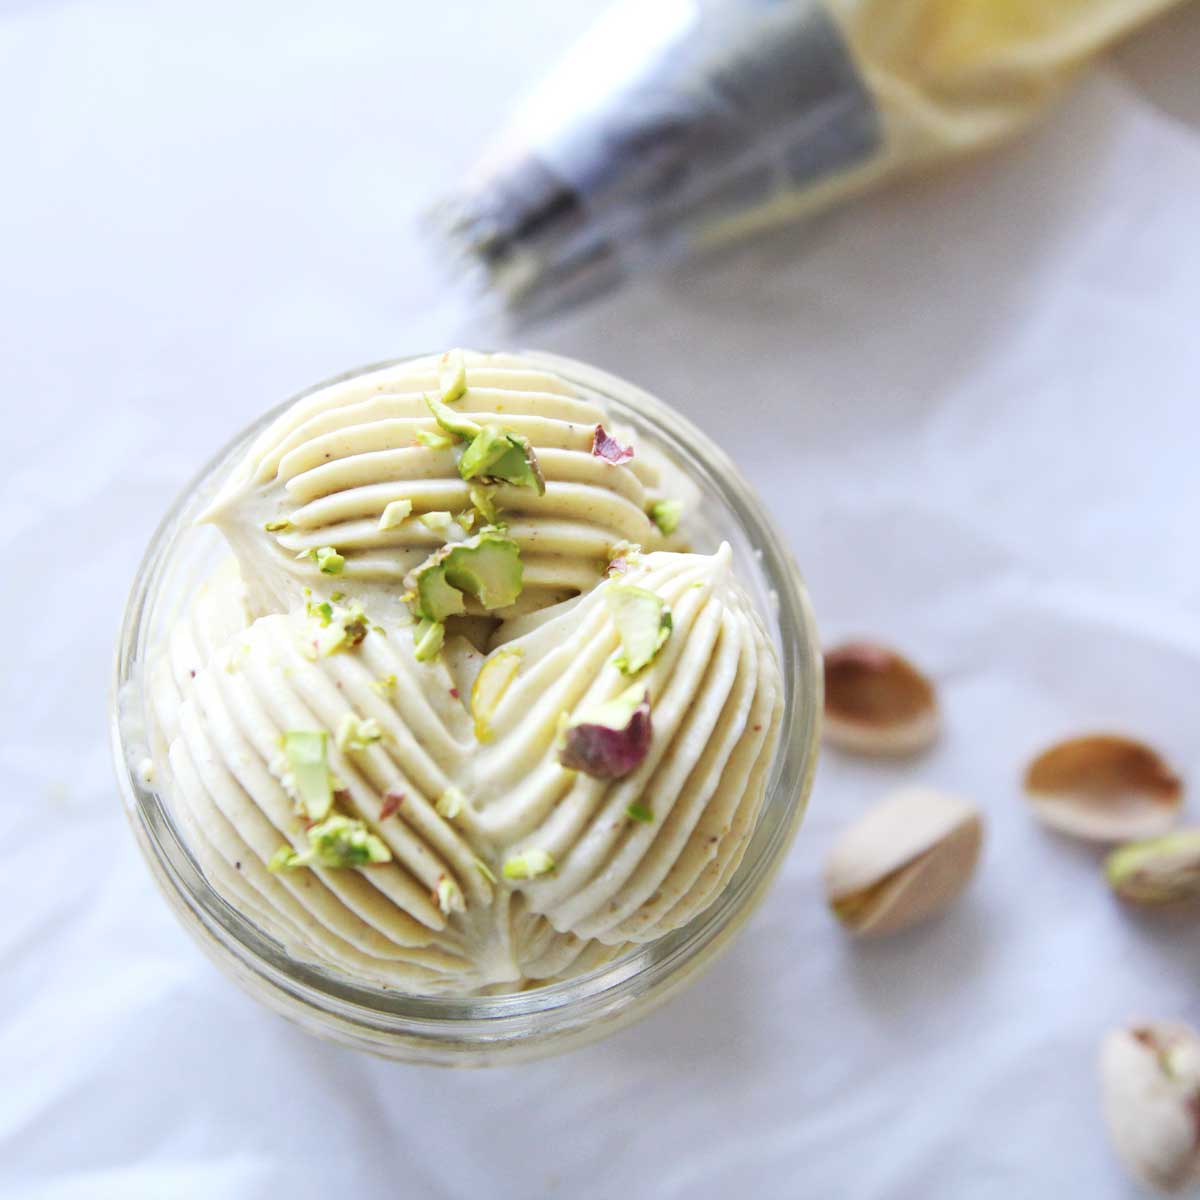 Honey Pistachio Whipped Cream (Stabilized with Cream Cheese)